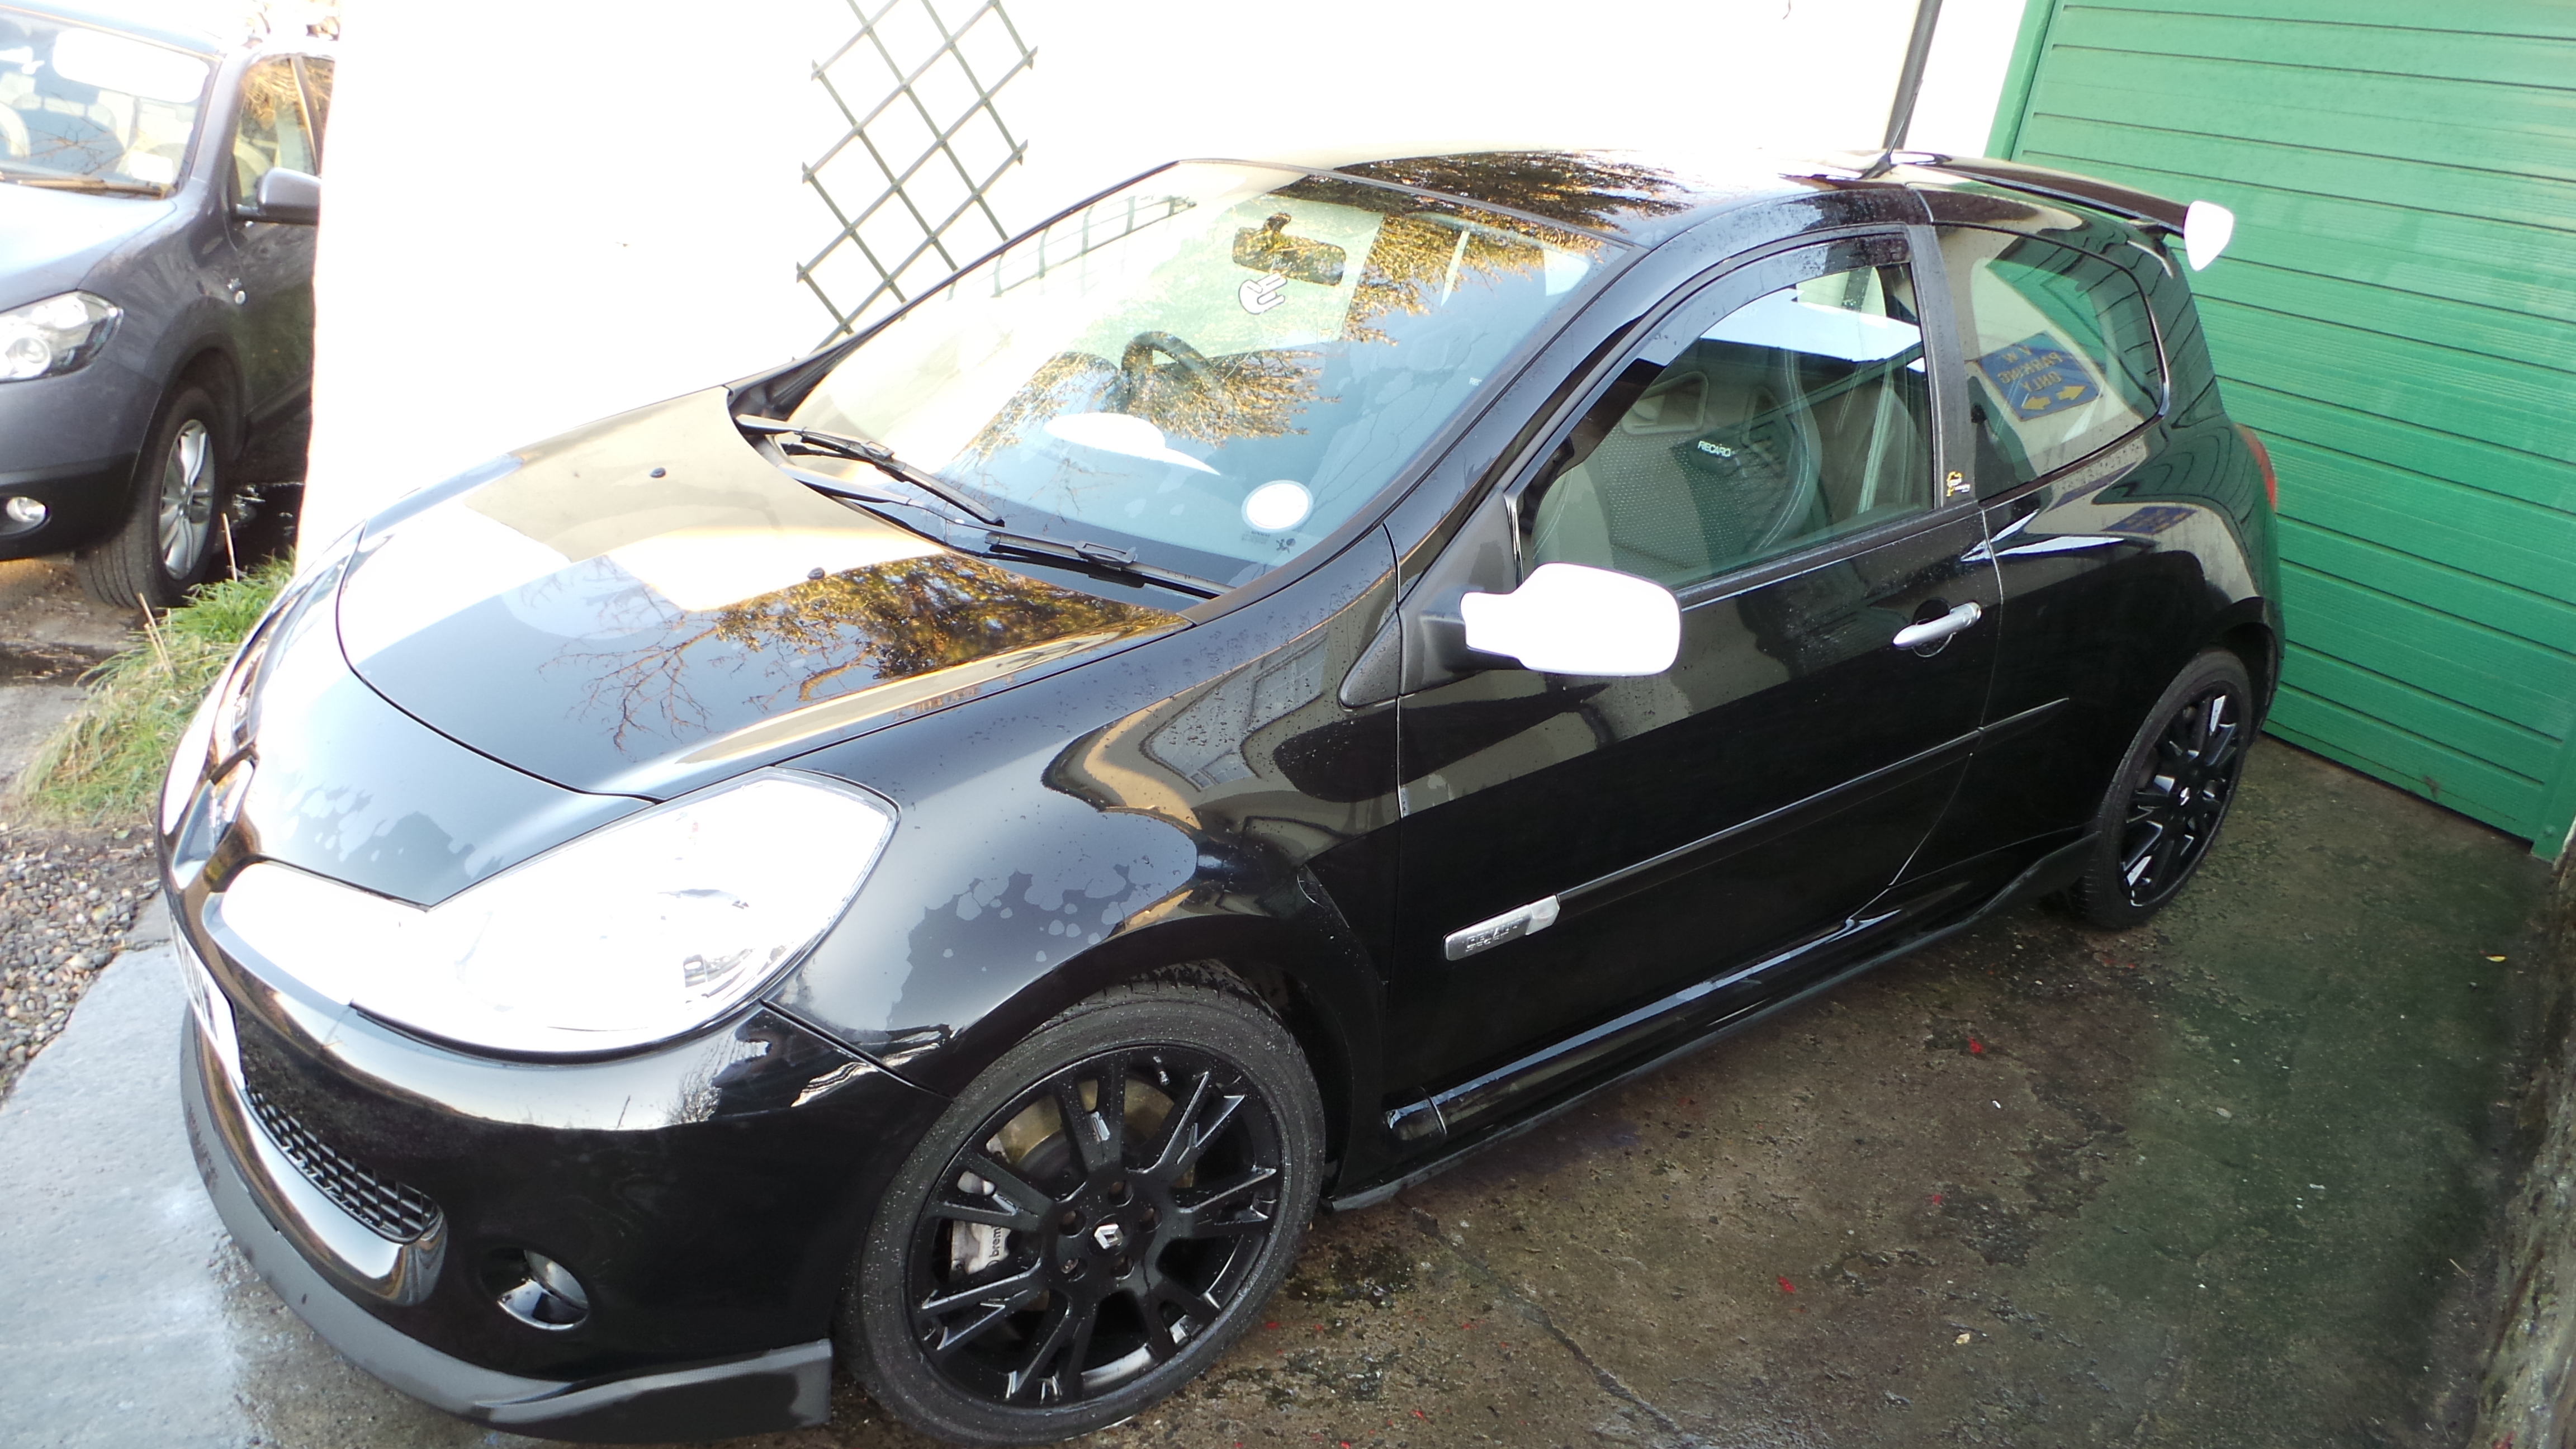 RenaultSport Clio 197 2.0 from private